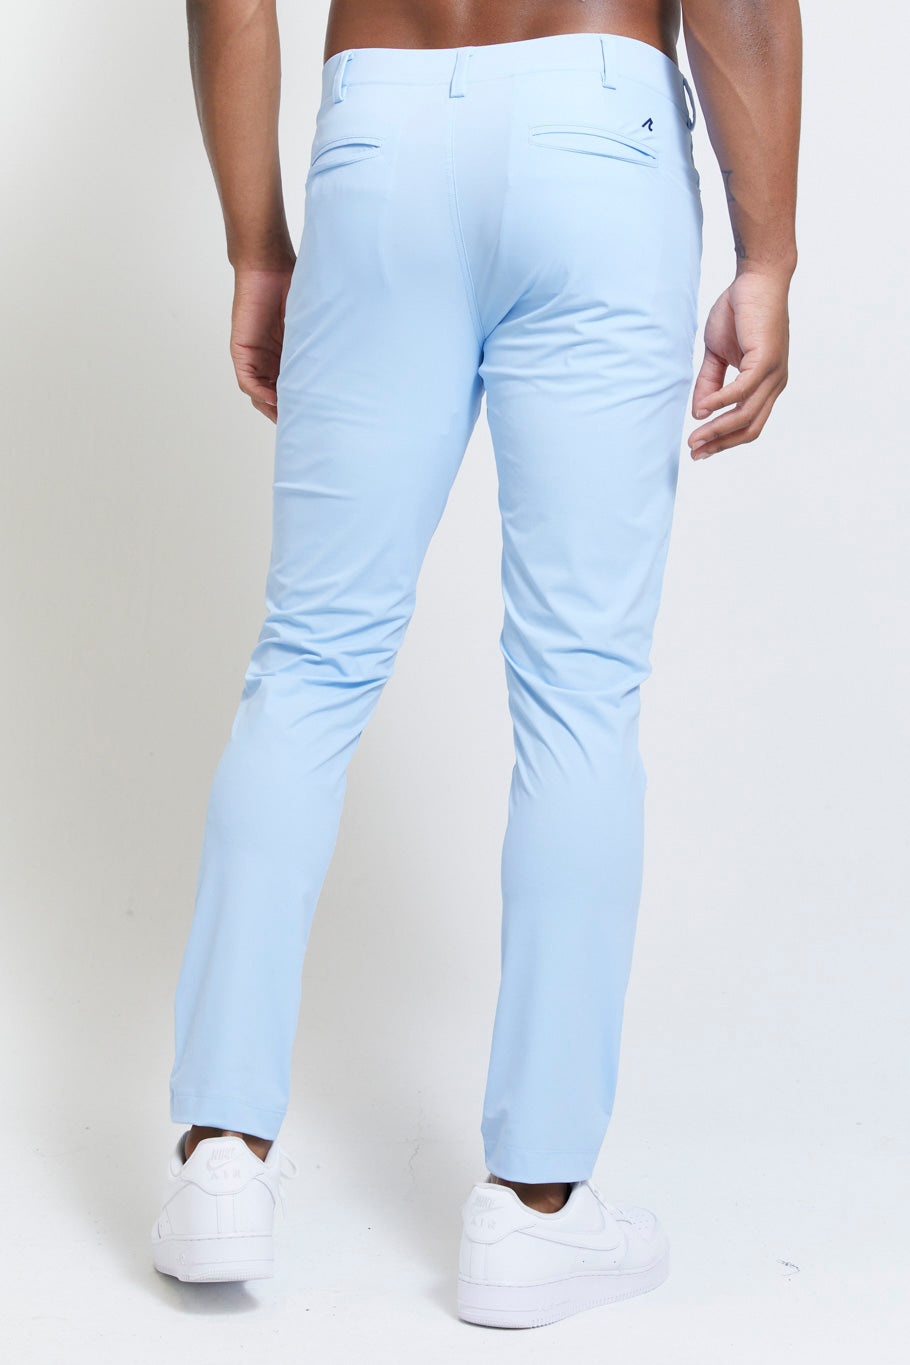 Image of the kent pull-on trouser in skydiver